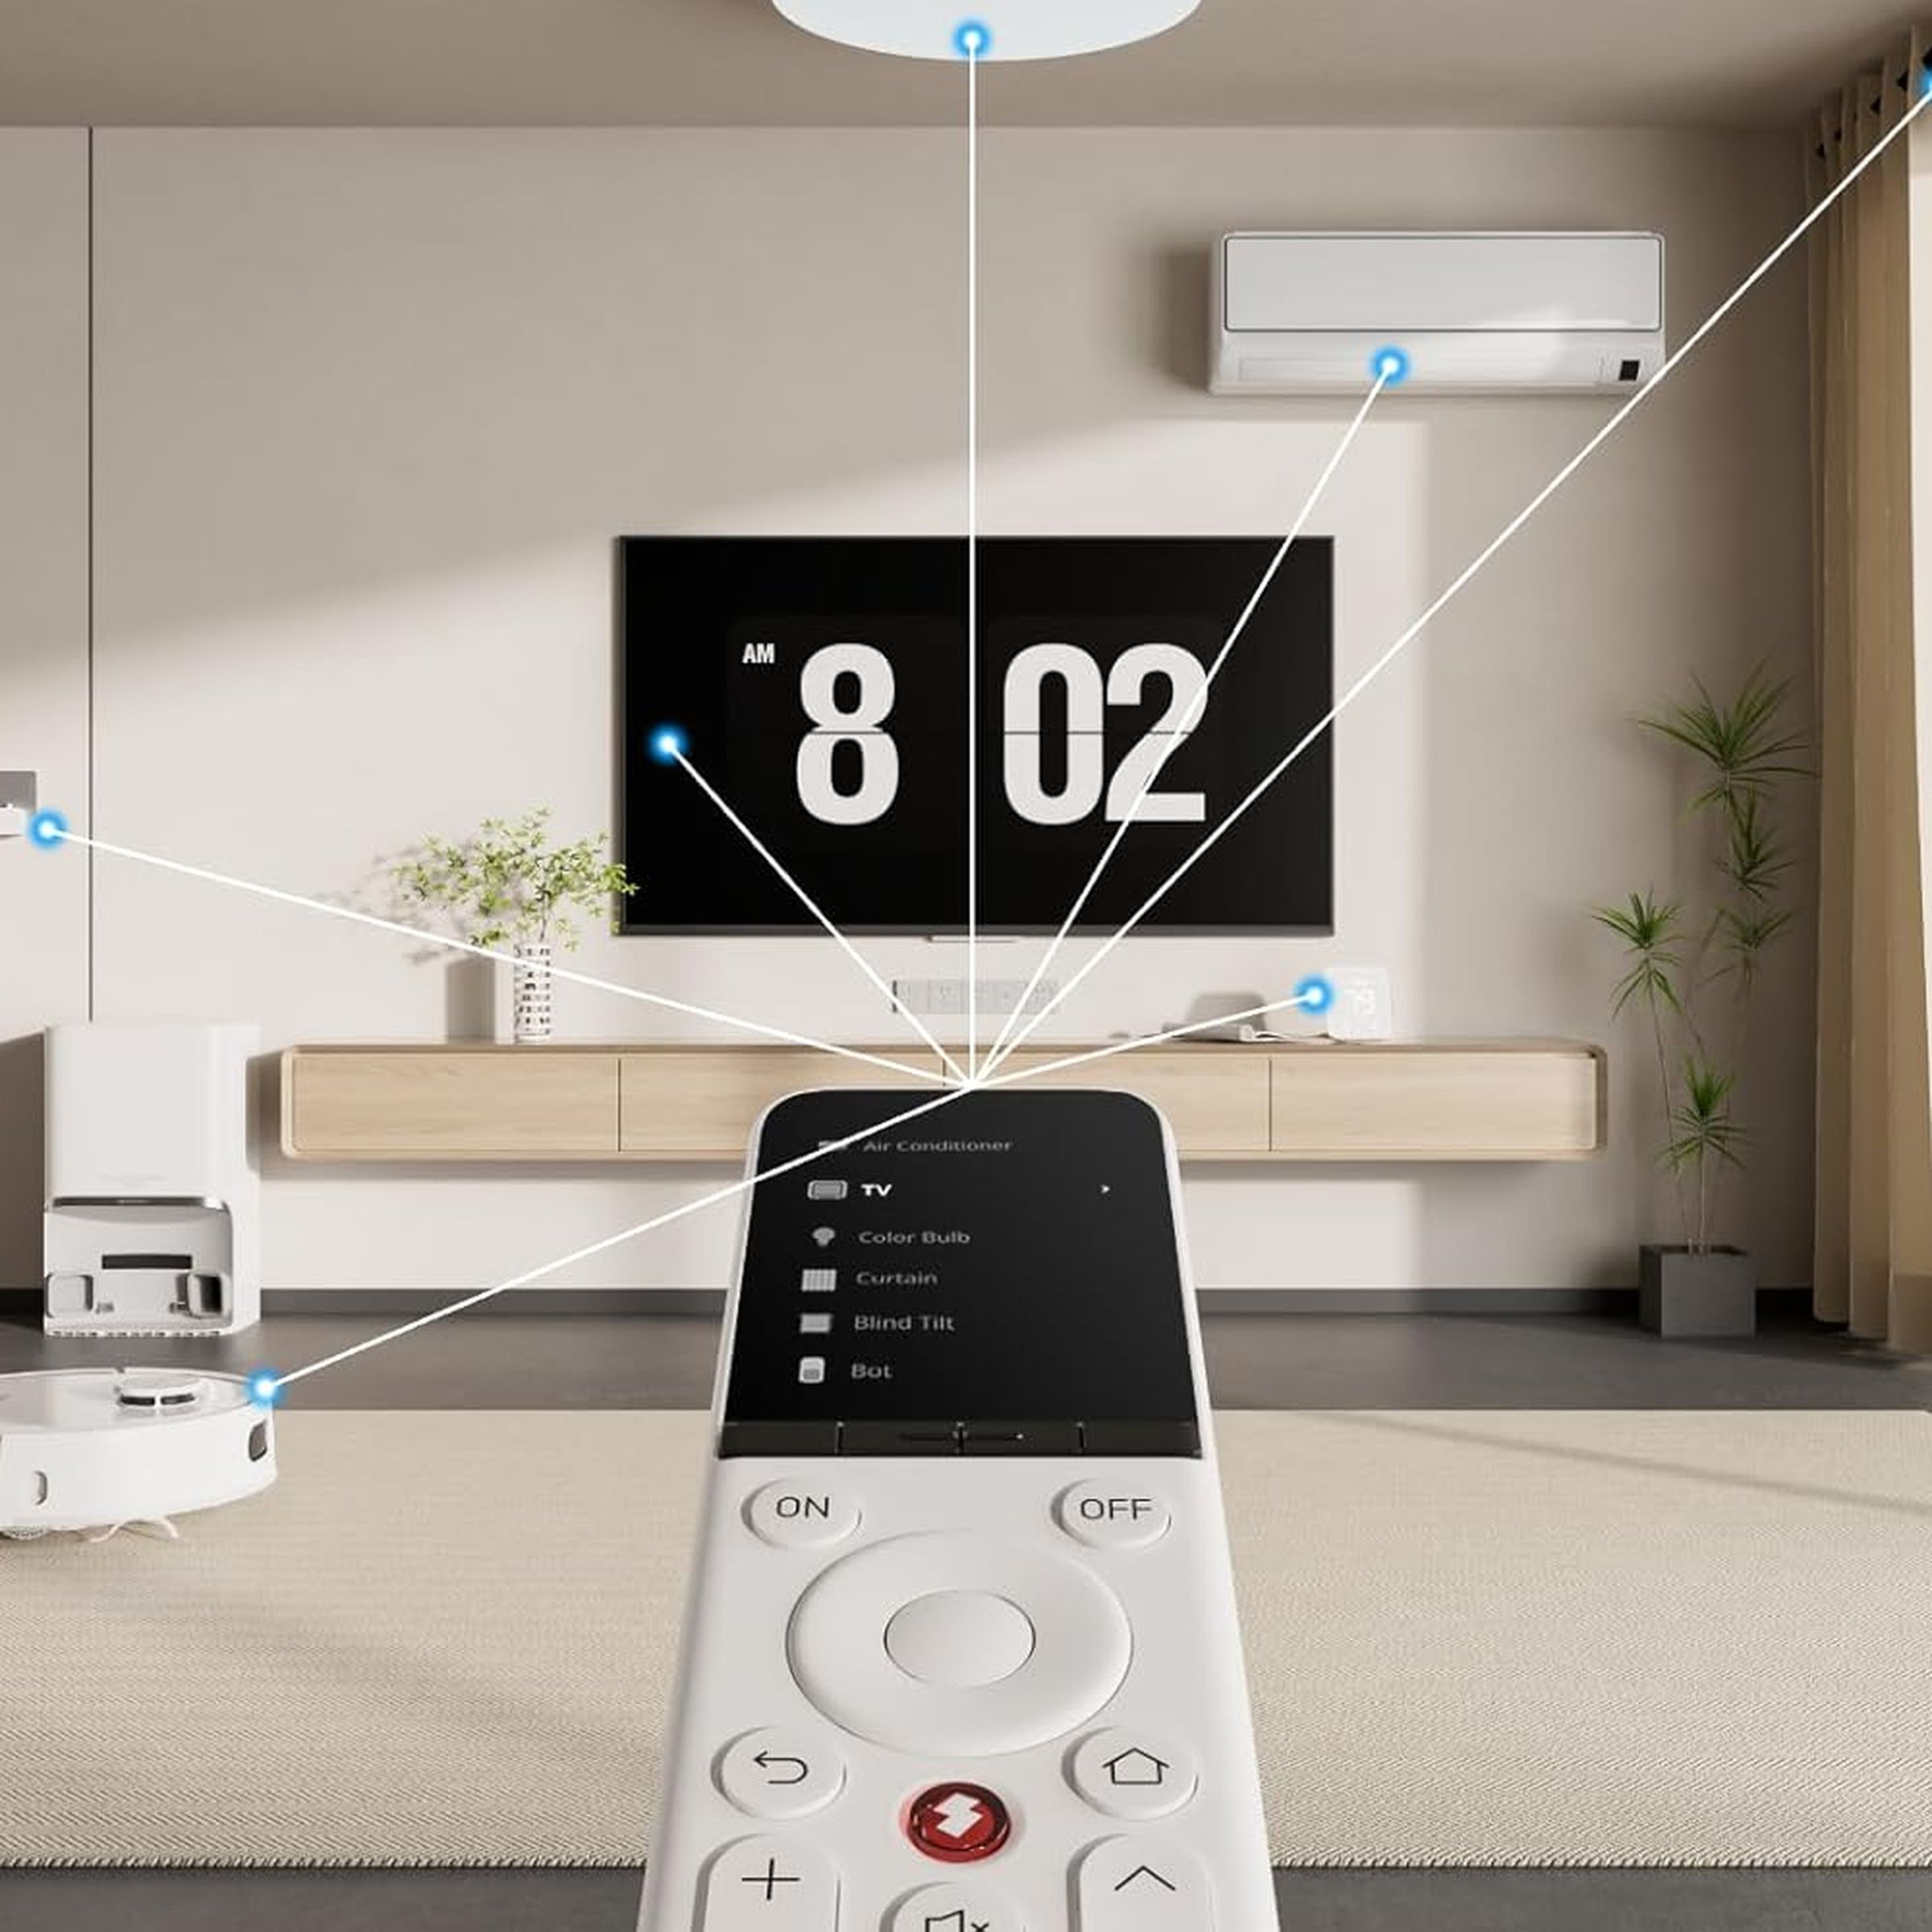 SwitchBot’s Universal Remote shown controlling several smart home devices.